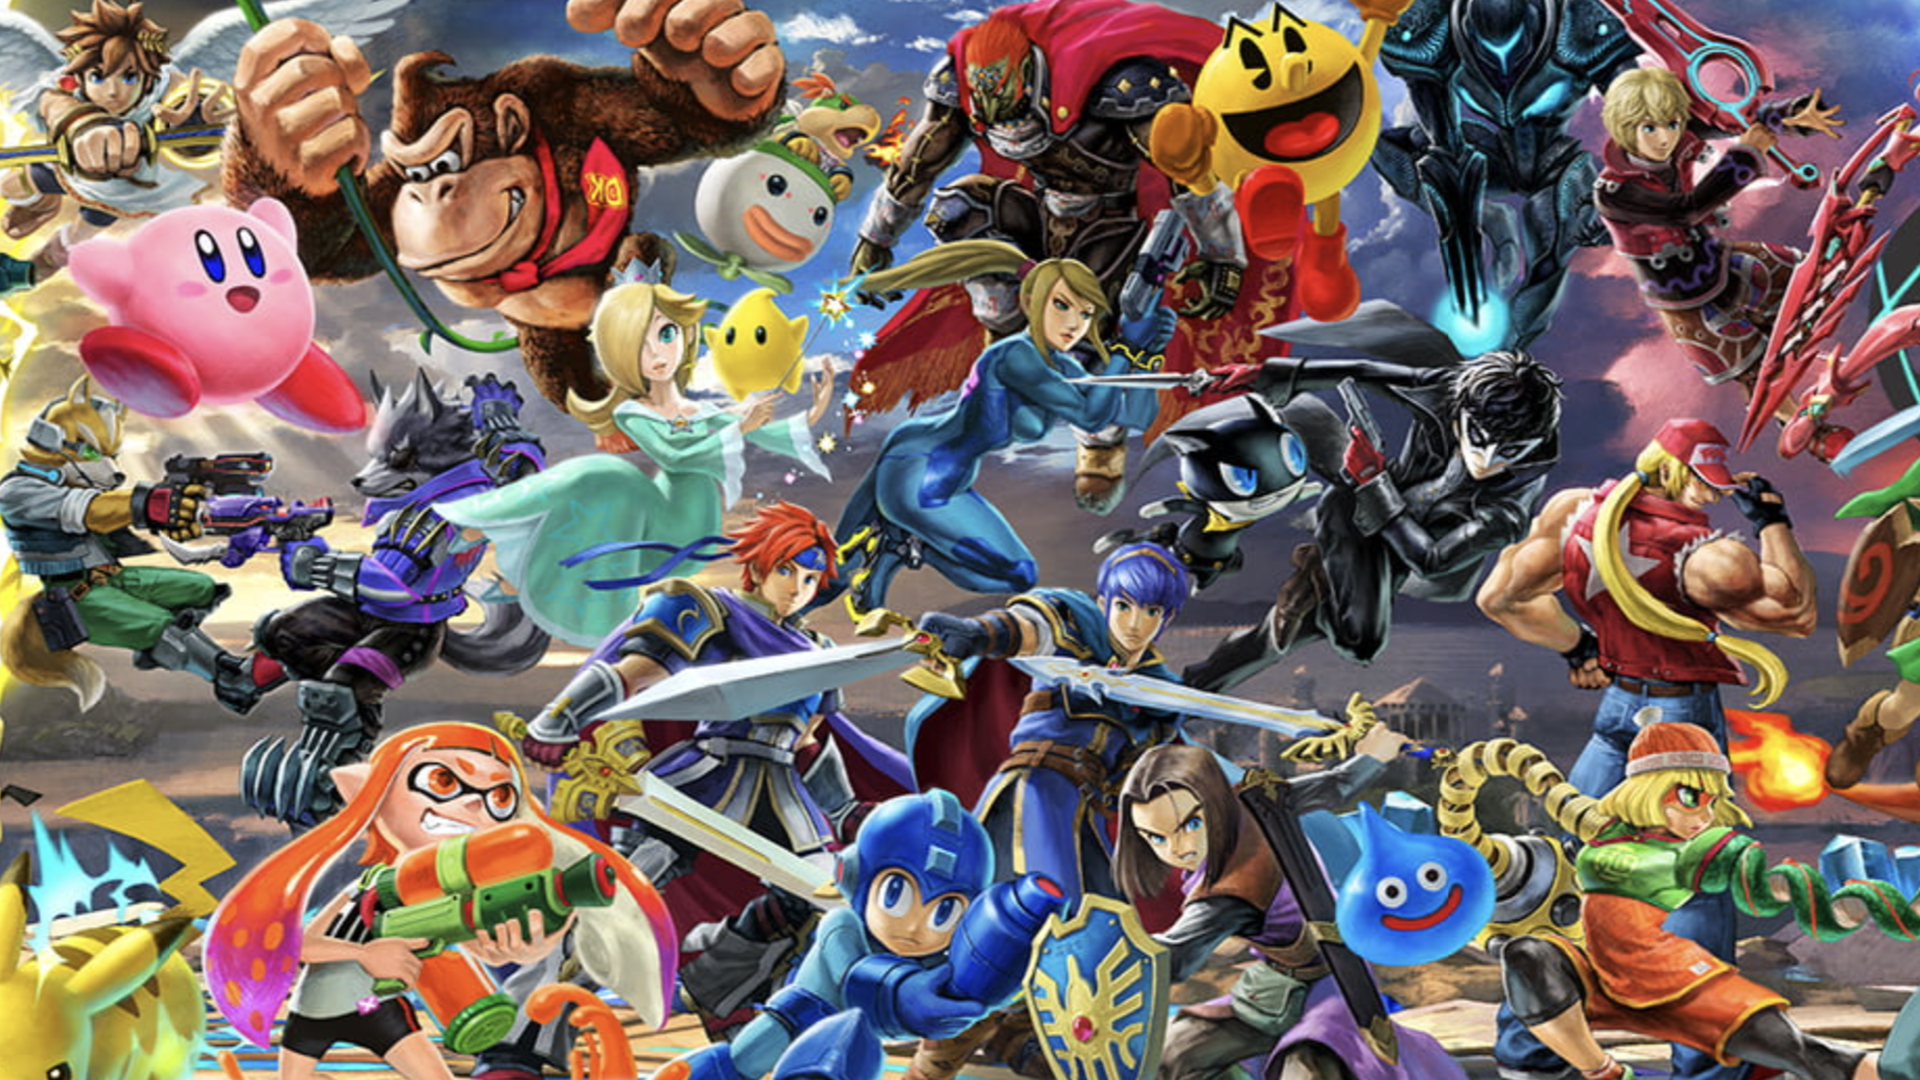 An illustration showing a plethora of Smash Bros characters